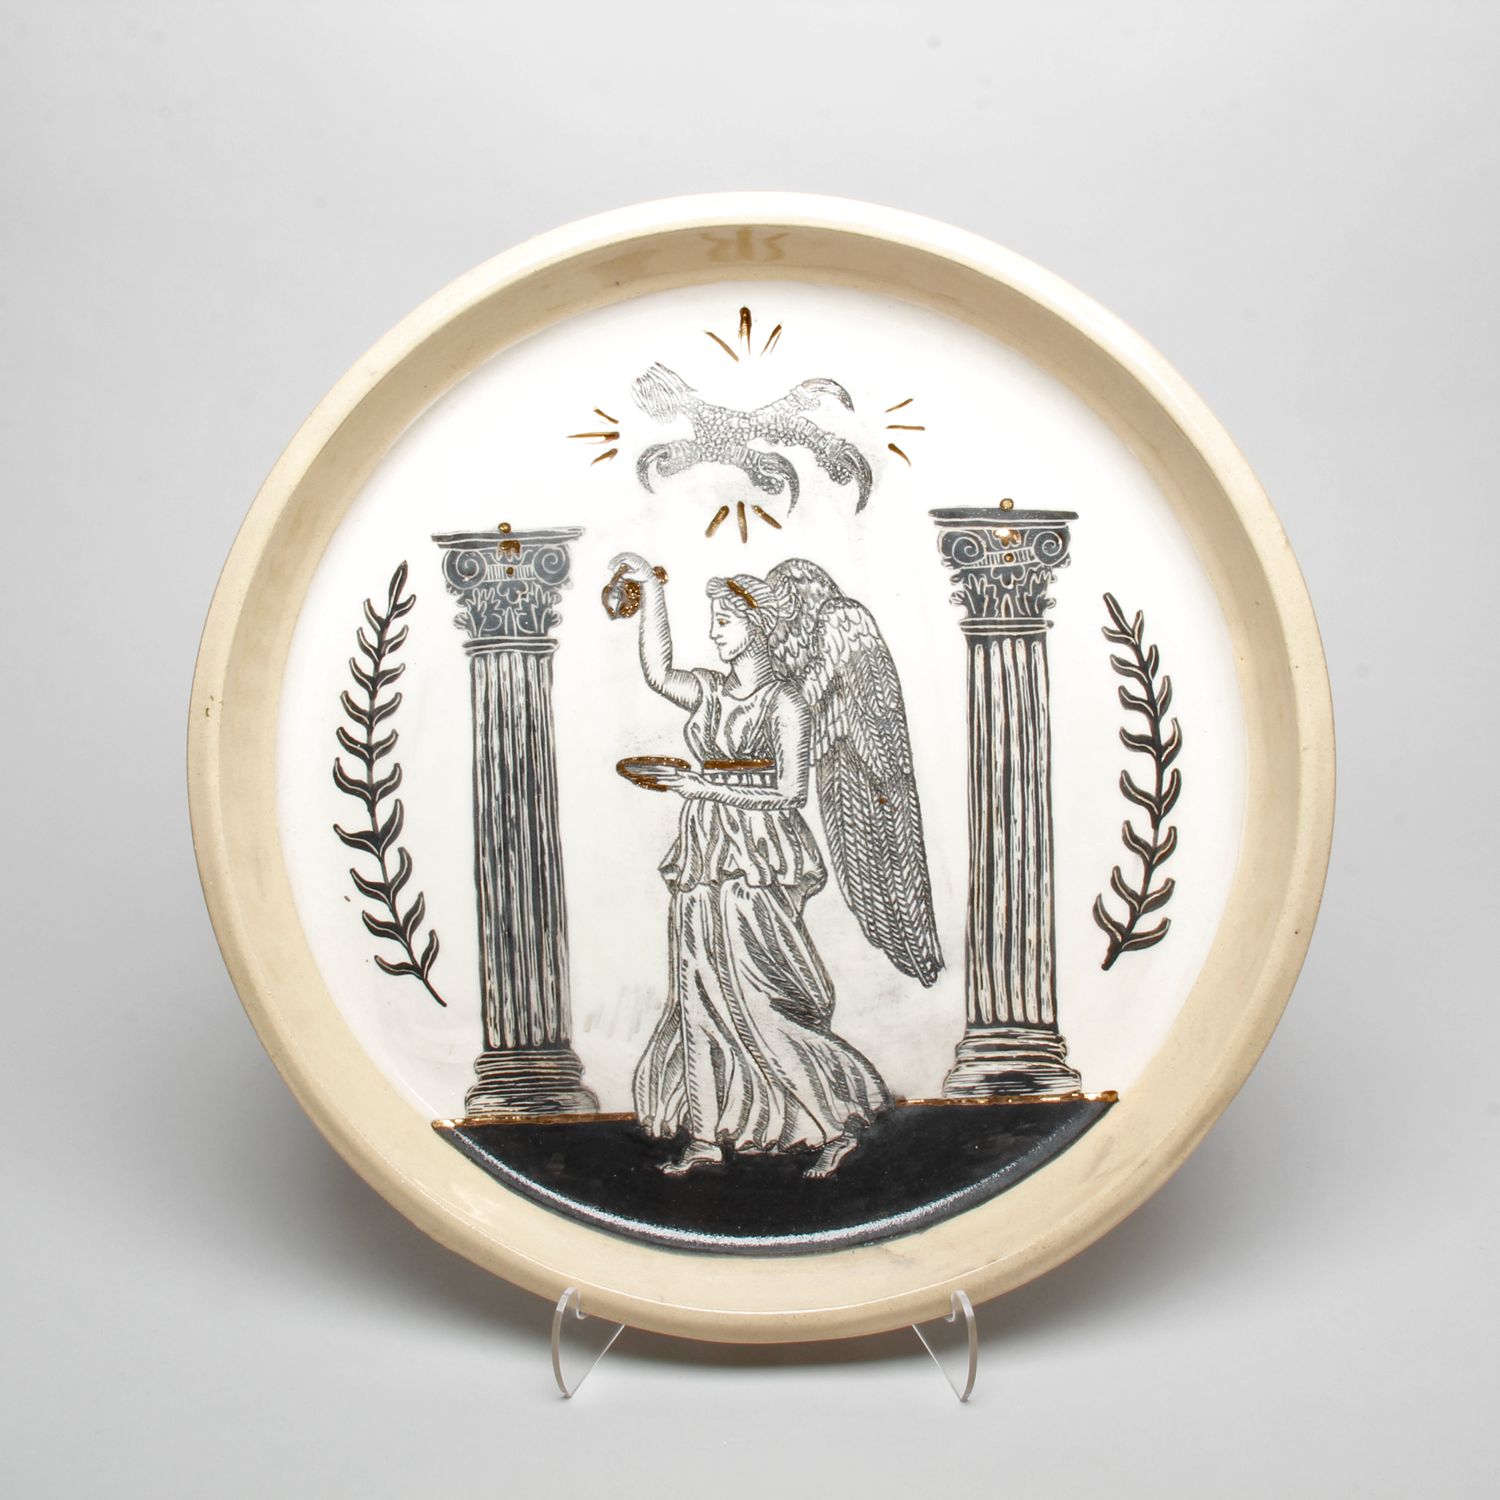 Emma Kip: Platter with Figure and Columns Product Image 1 of 3